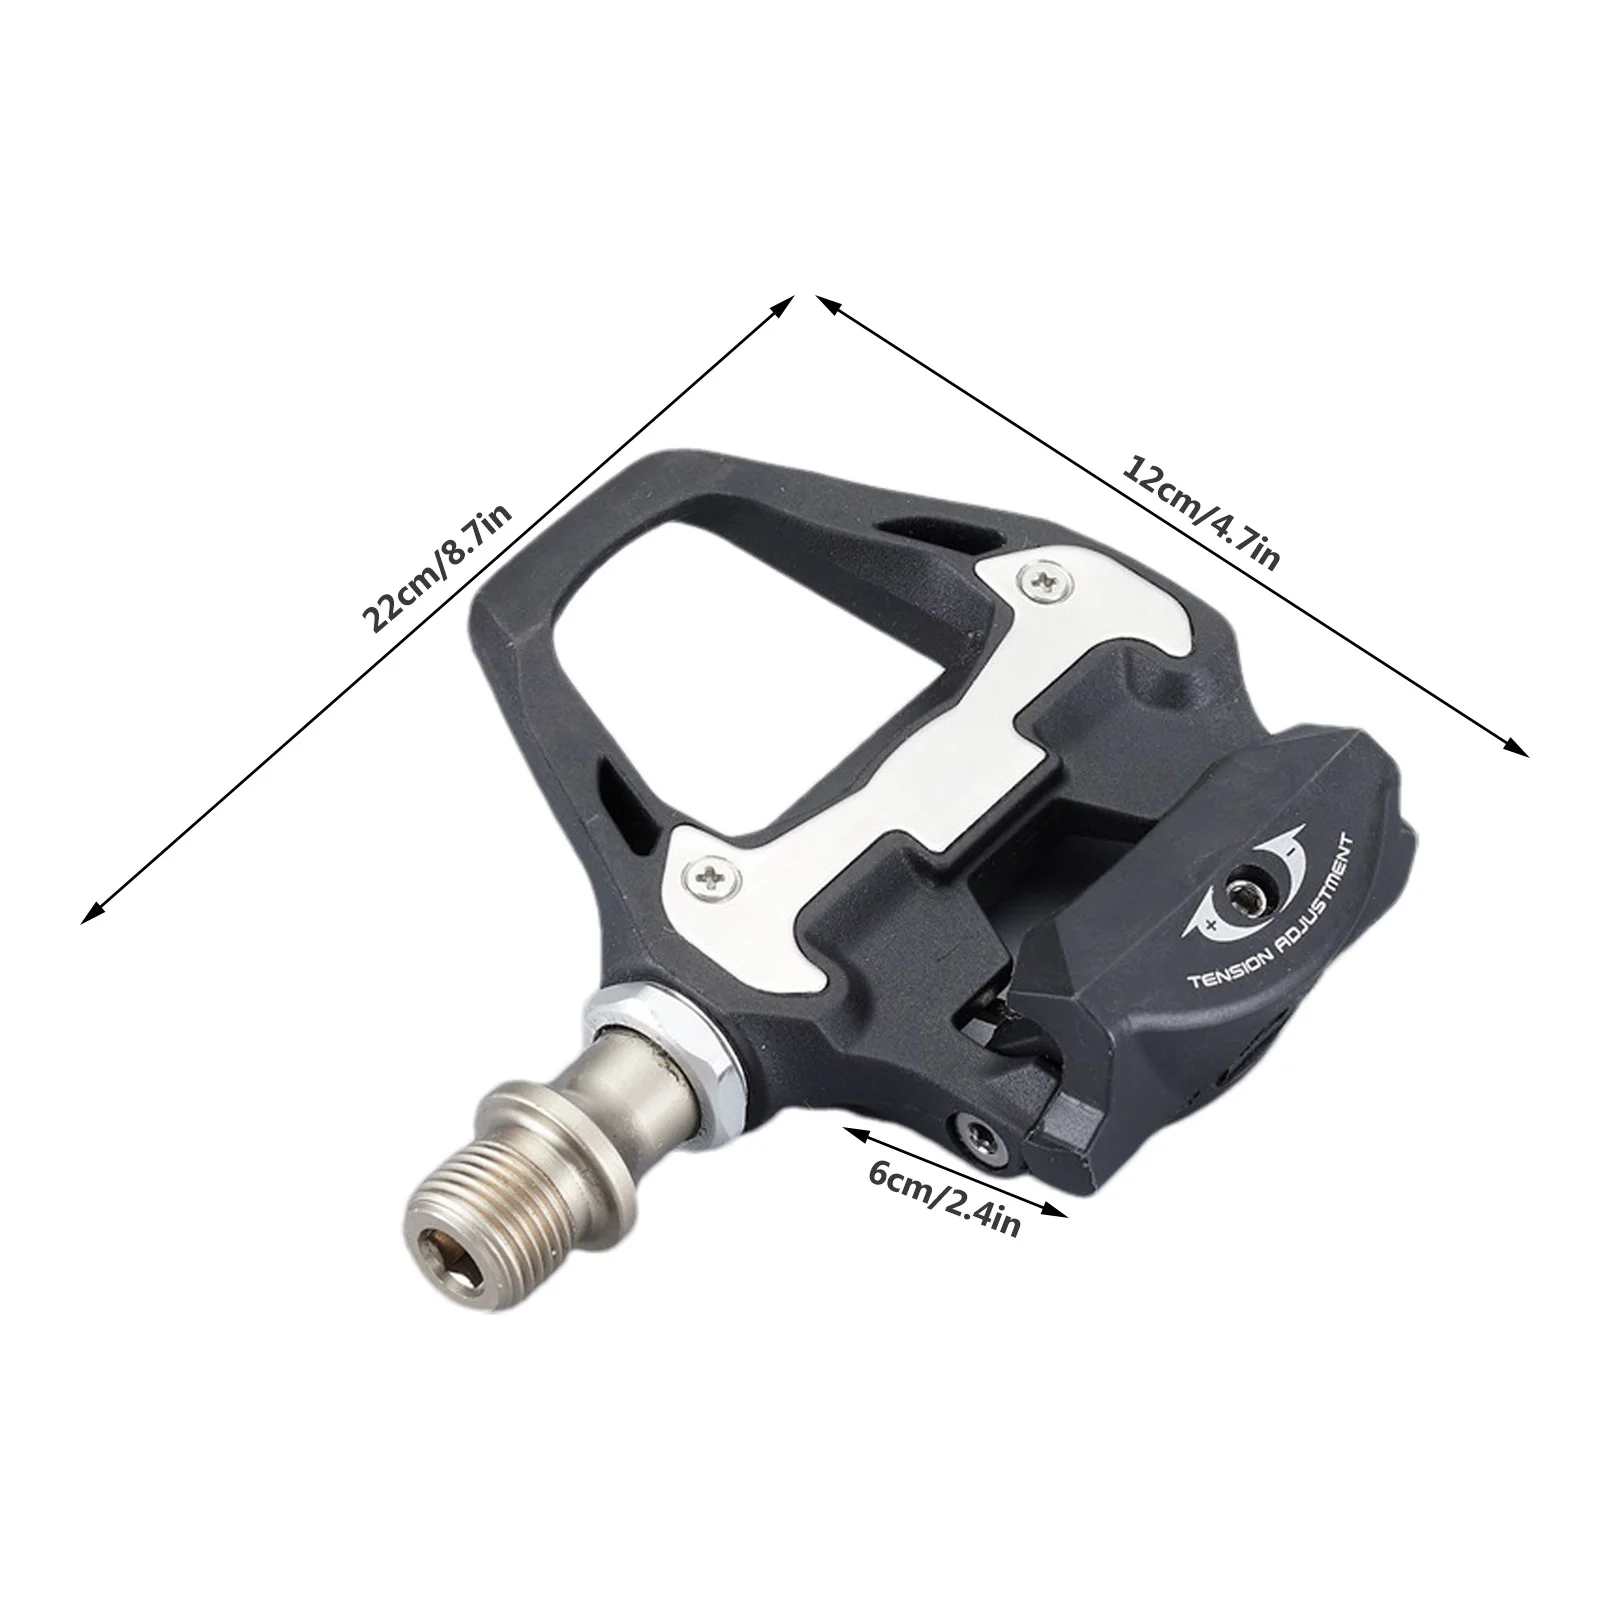 Ultegra PD-R8000 Pedals Road Bike Clipless Pedals With SPD-SL R8000 Cleats Pedal SM-SH11 Box Road Bike Pedals images - 6